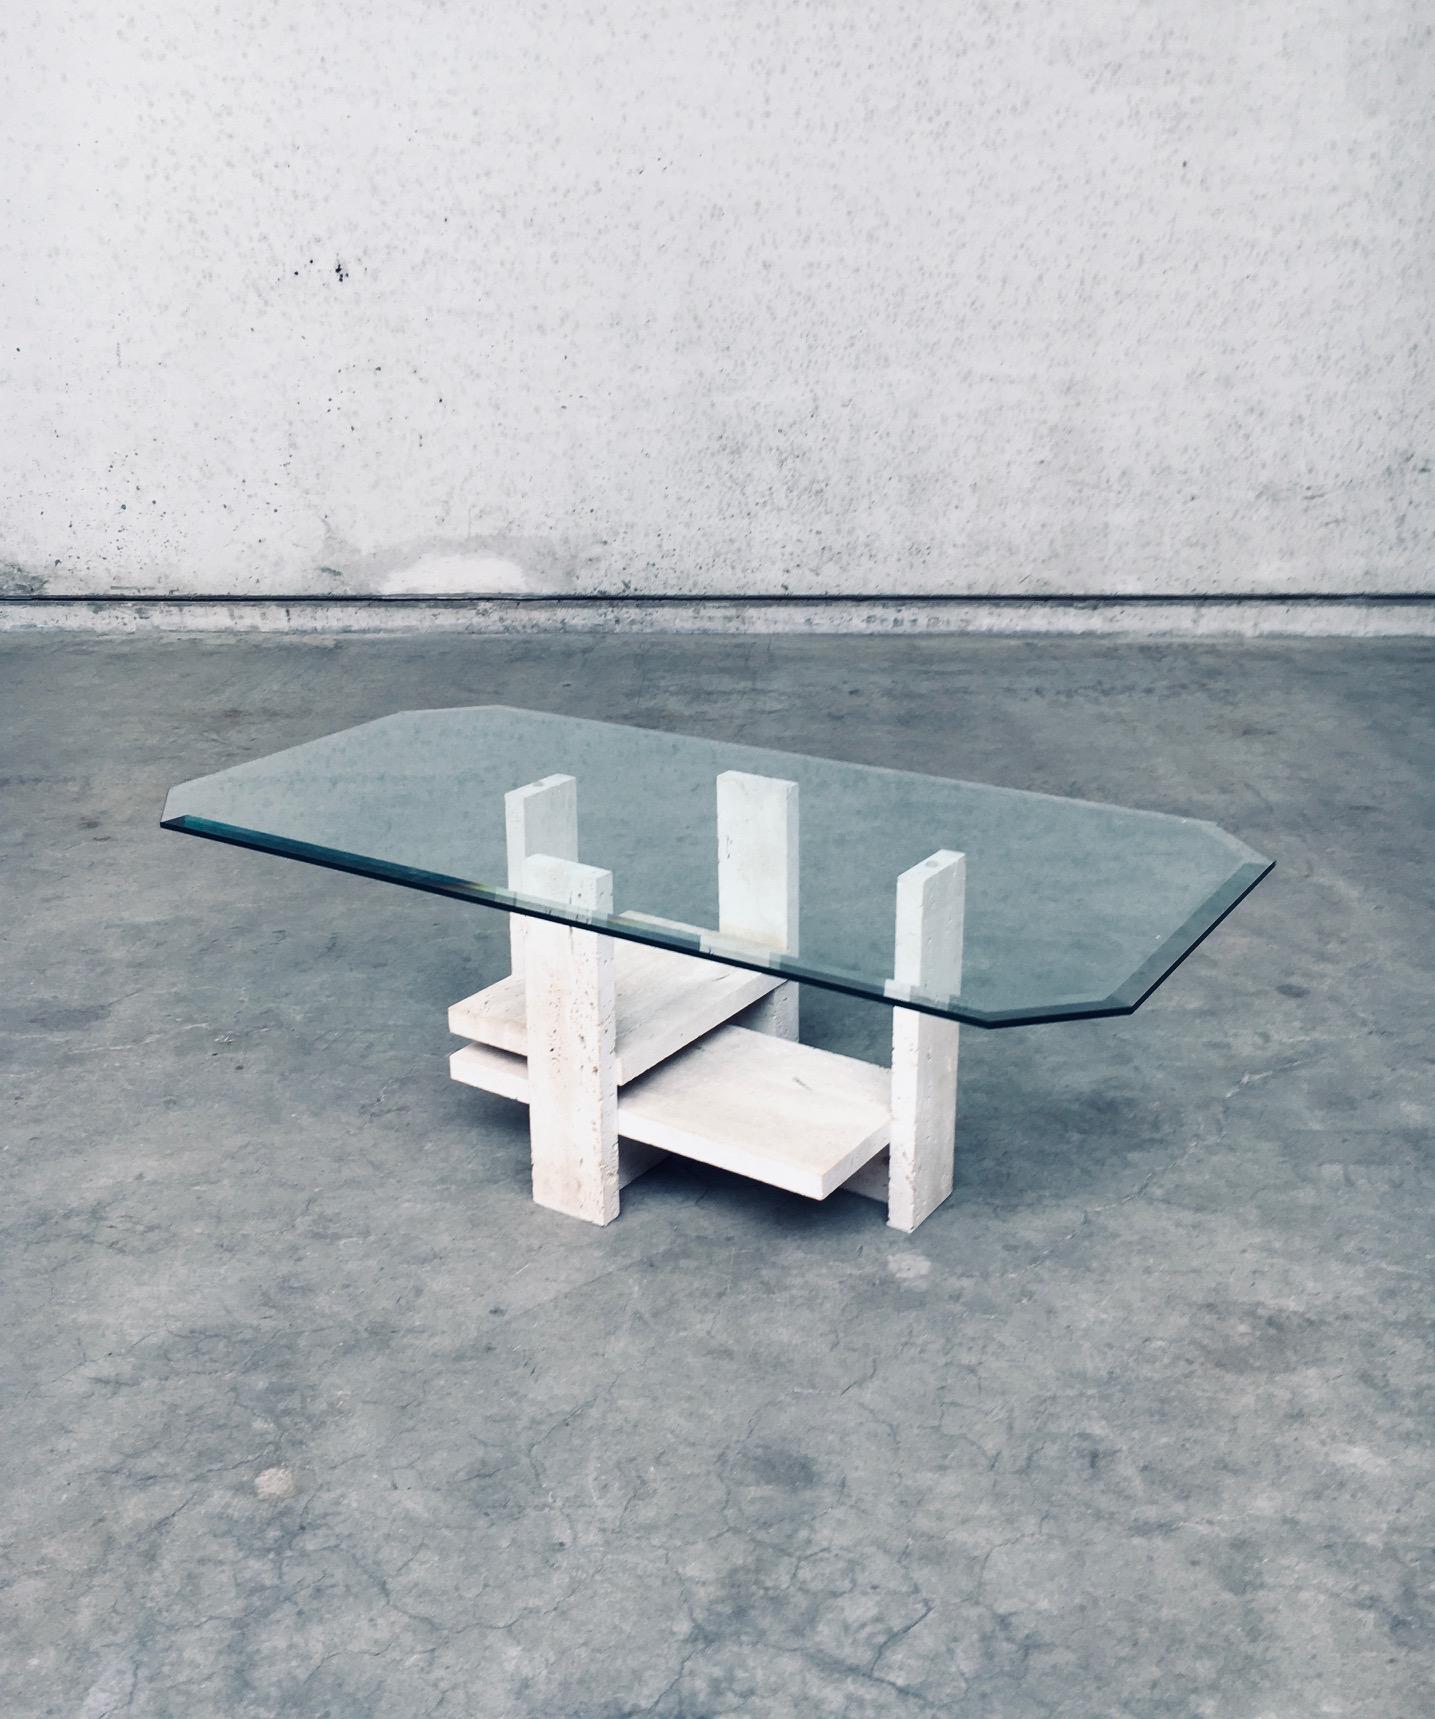 Brutalist Design Travertine Coffee Table by Willy Ballez, Belgium 1970's For Sale 9